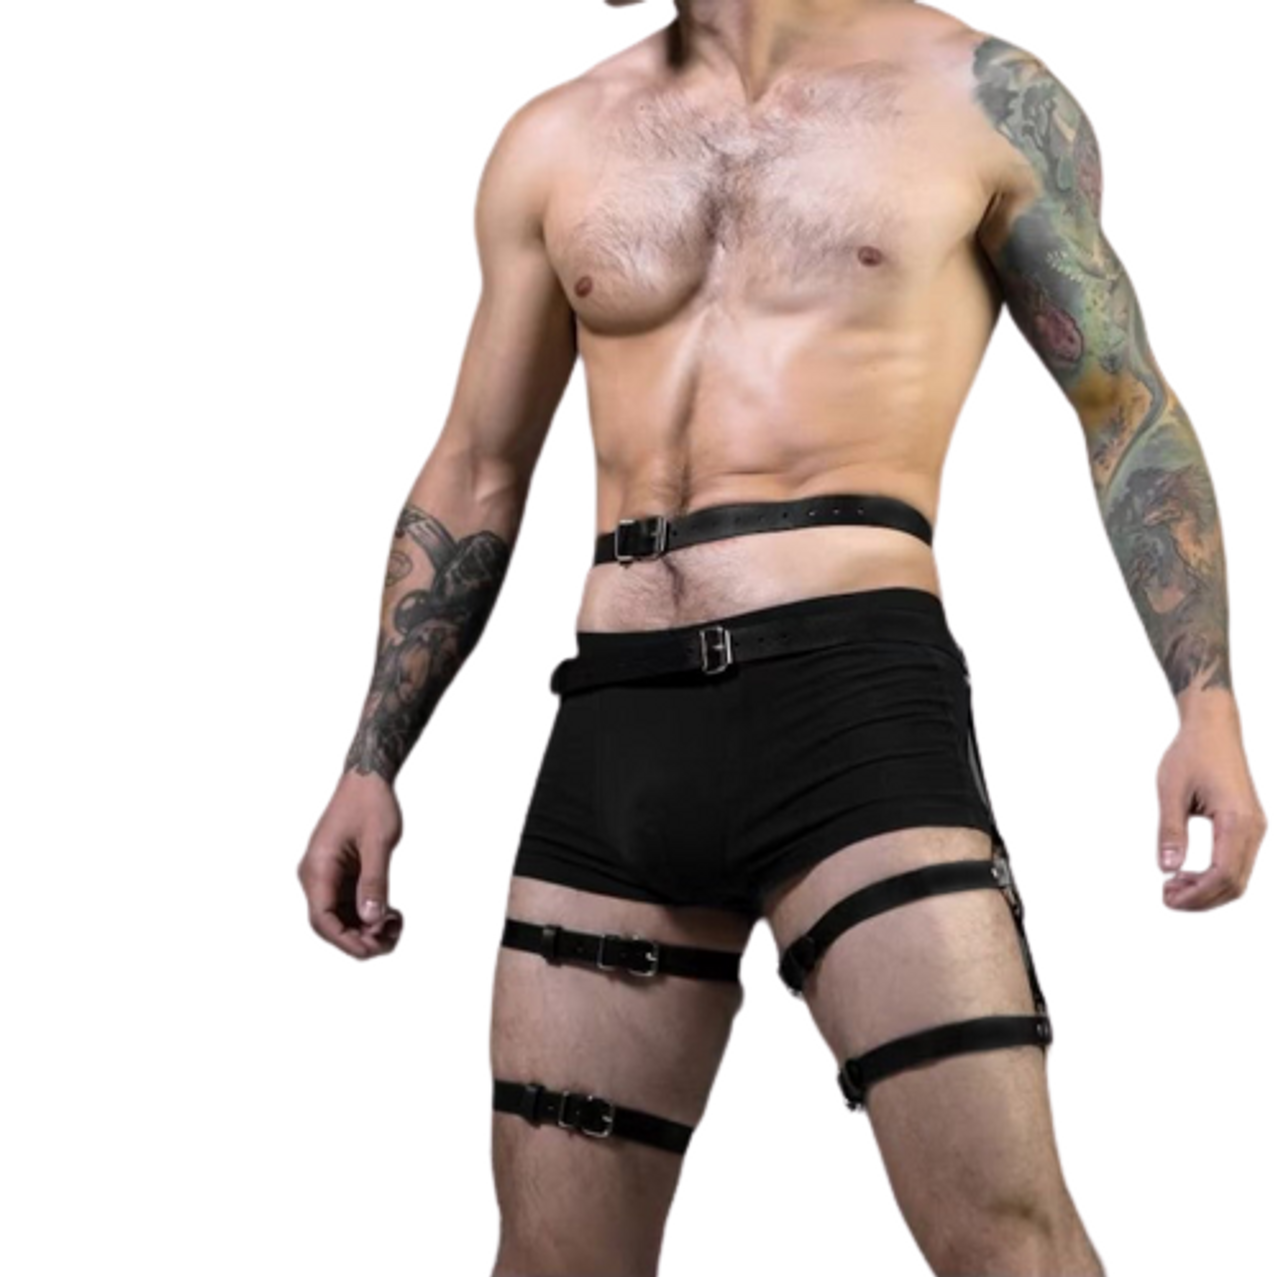 Leather Thigh Harness For Men - Thigh Leg Harness